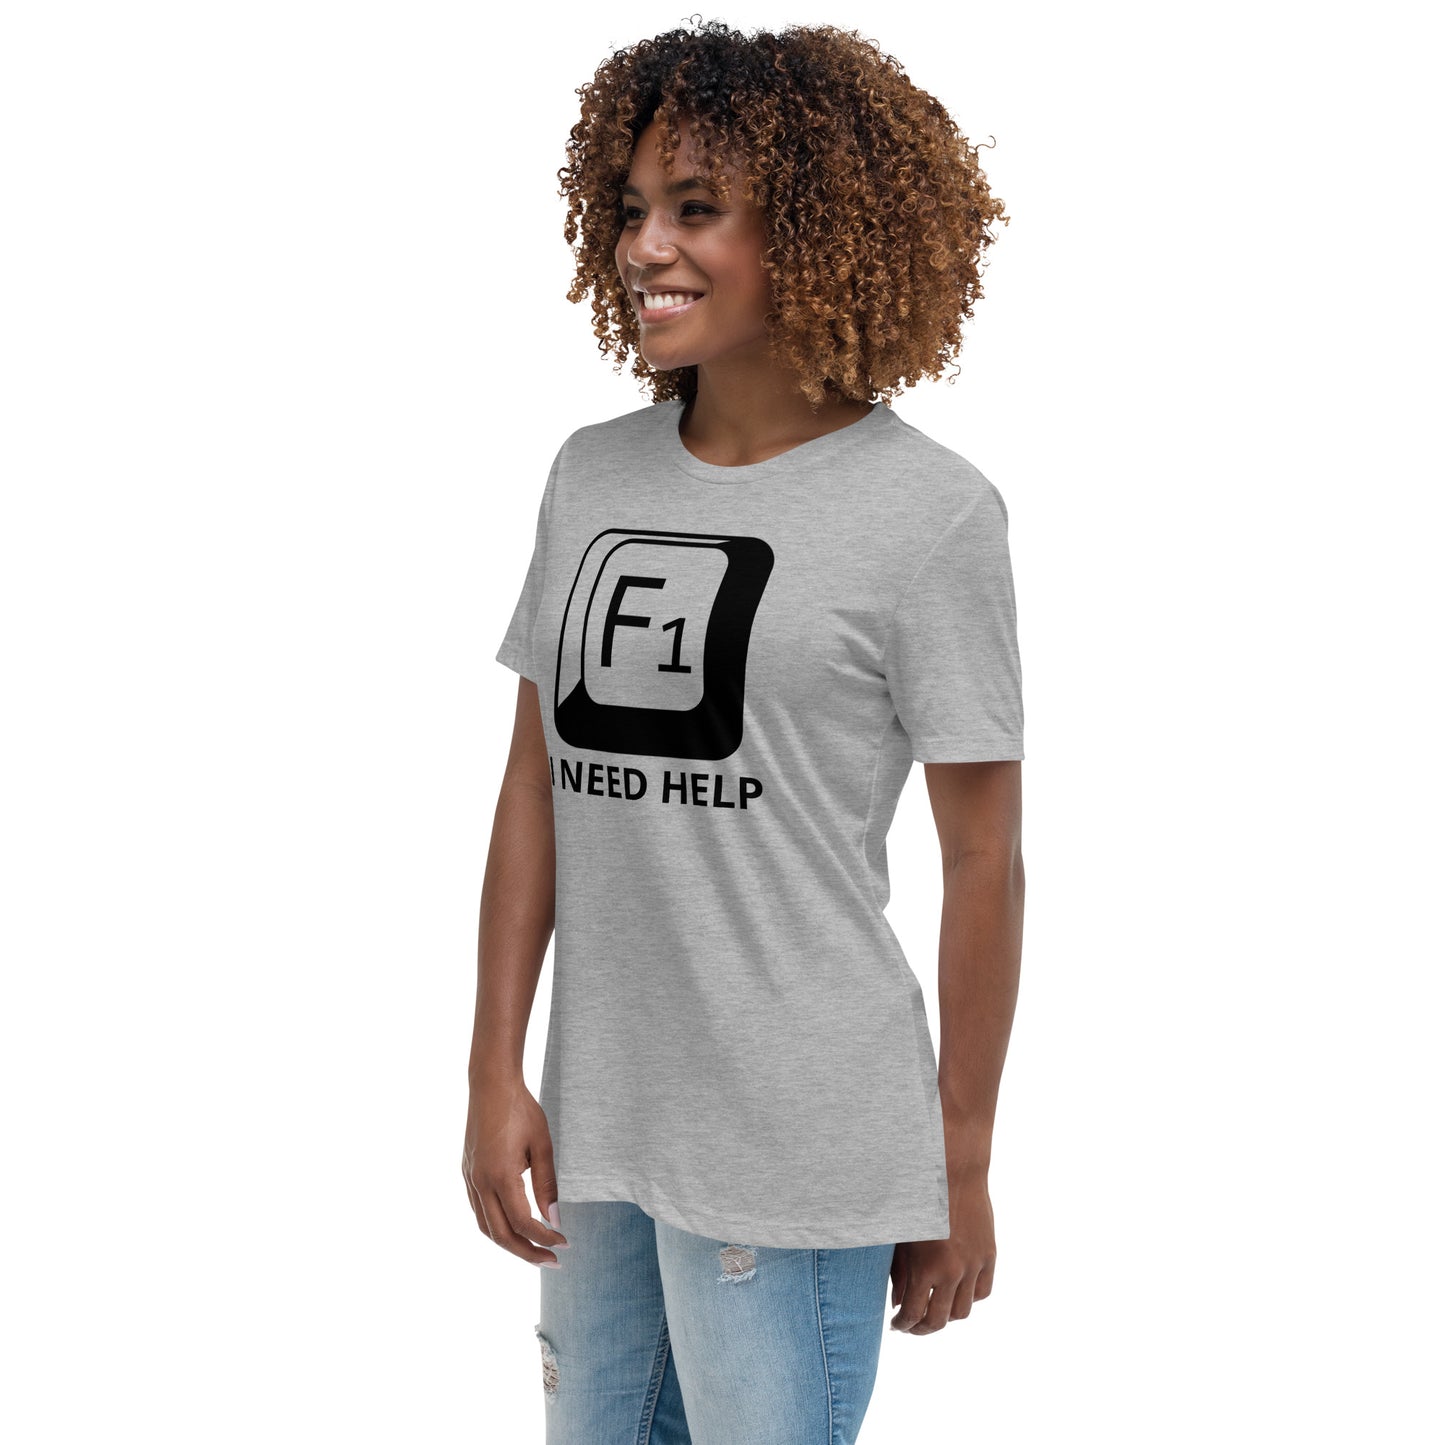 Woman with grey t-shirt with picture of "F1" key and text "I need help"